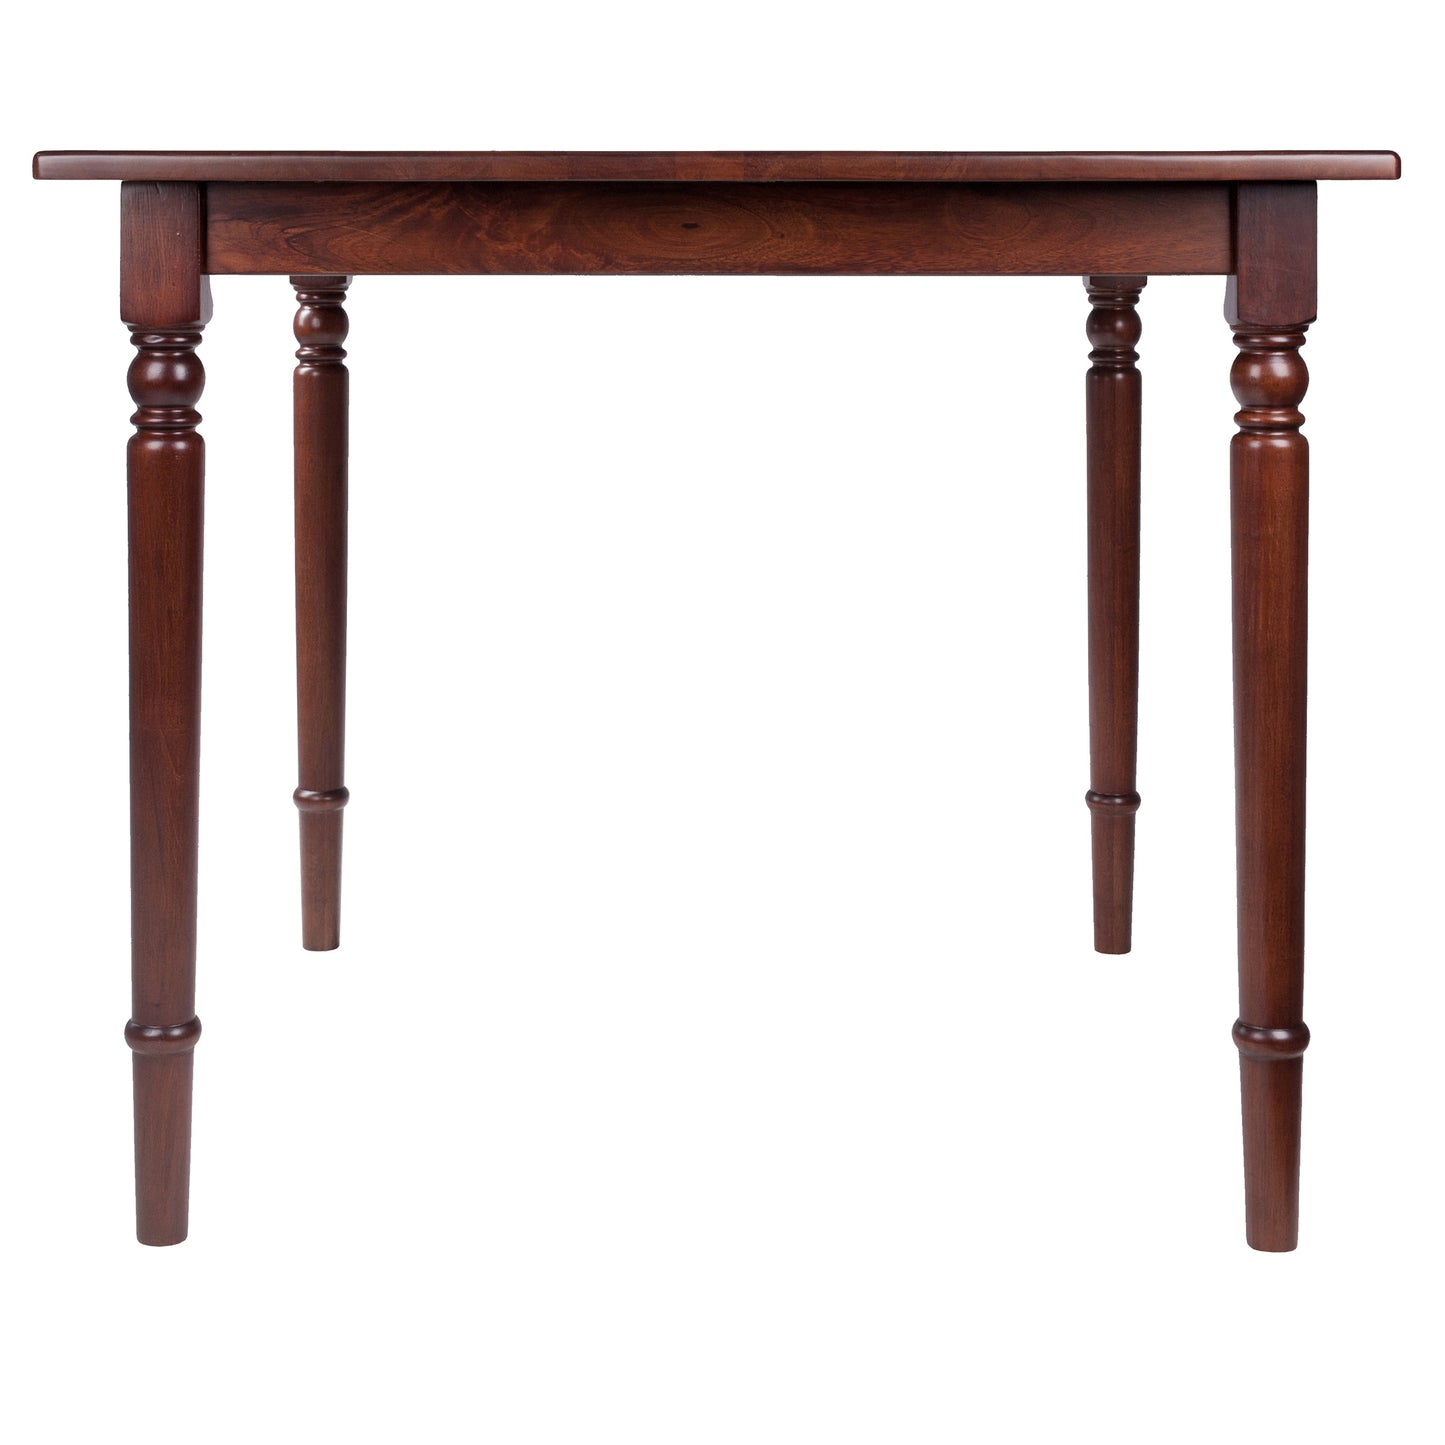 Mornay Square Dining Table; Walnut